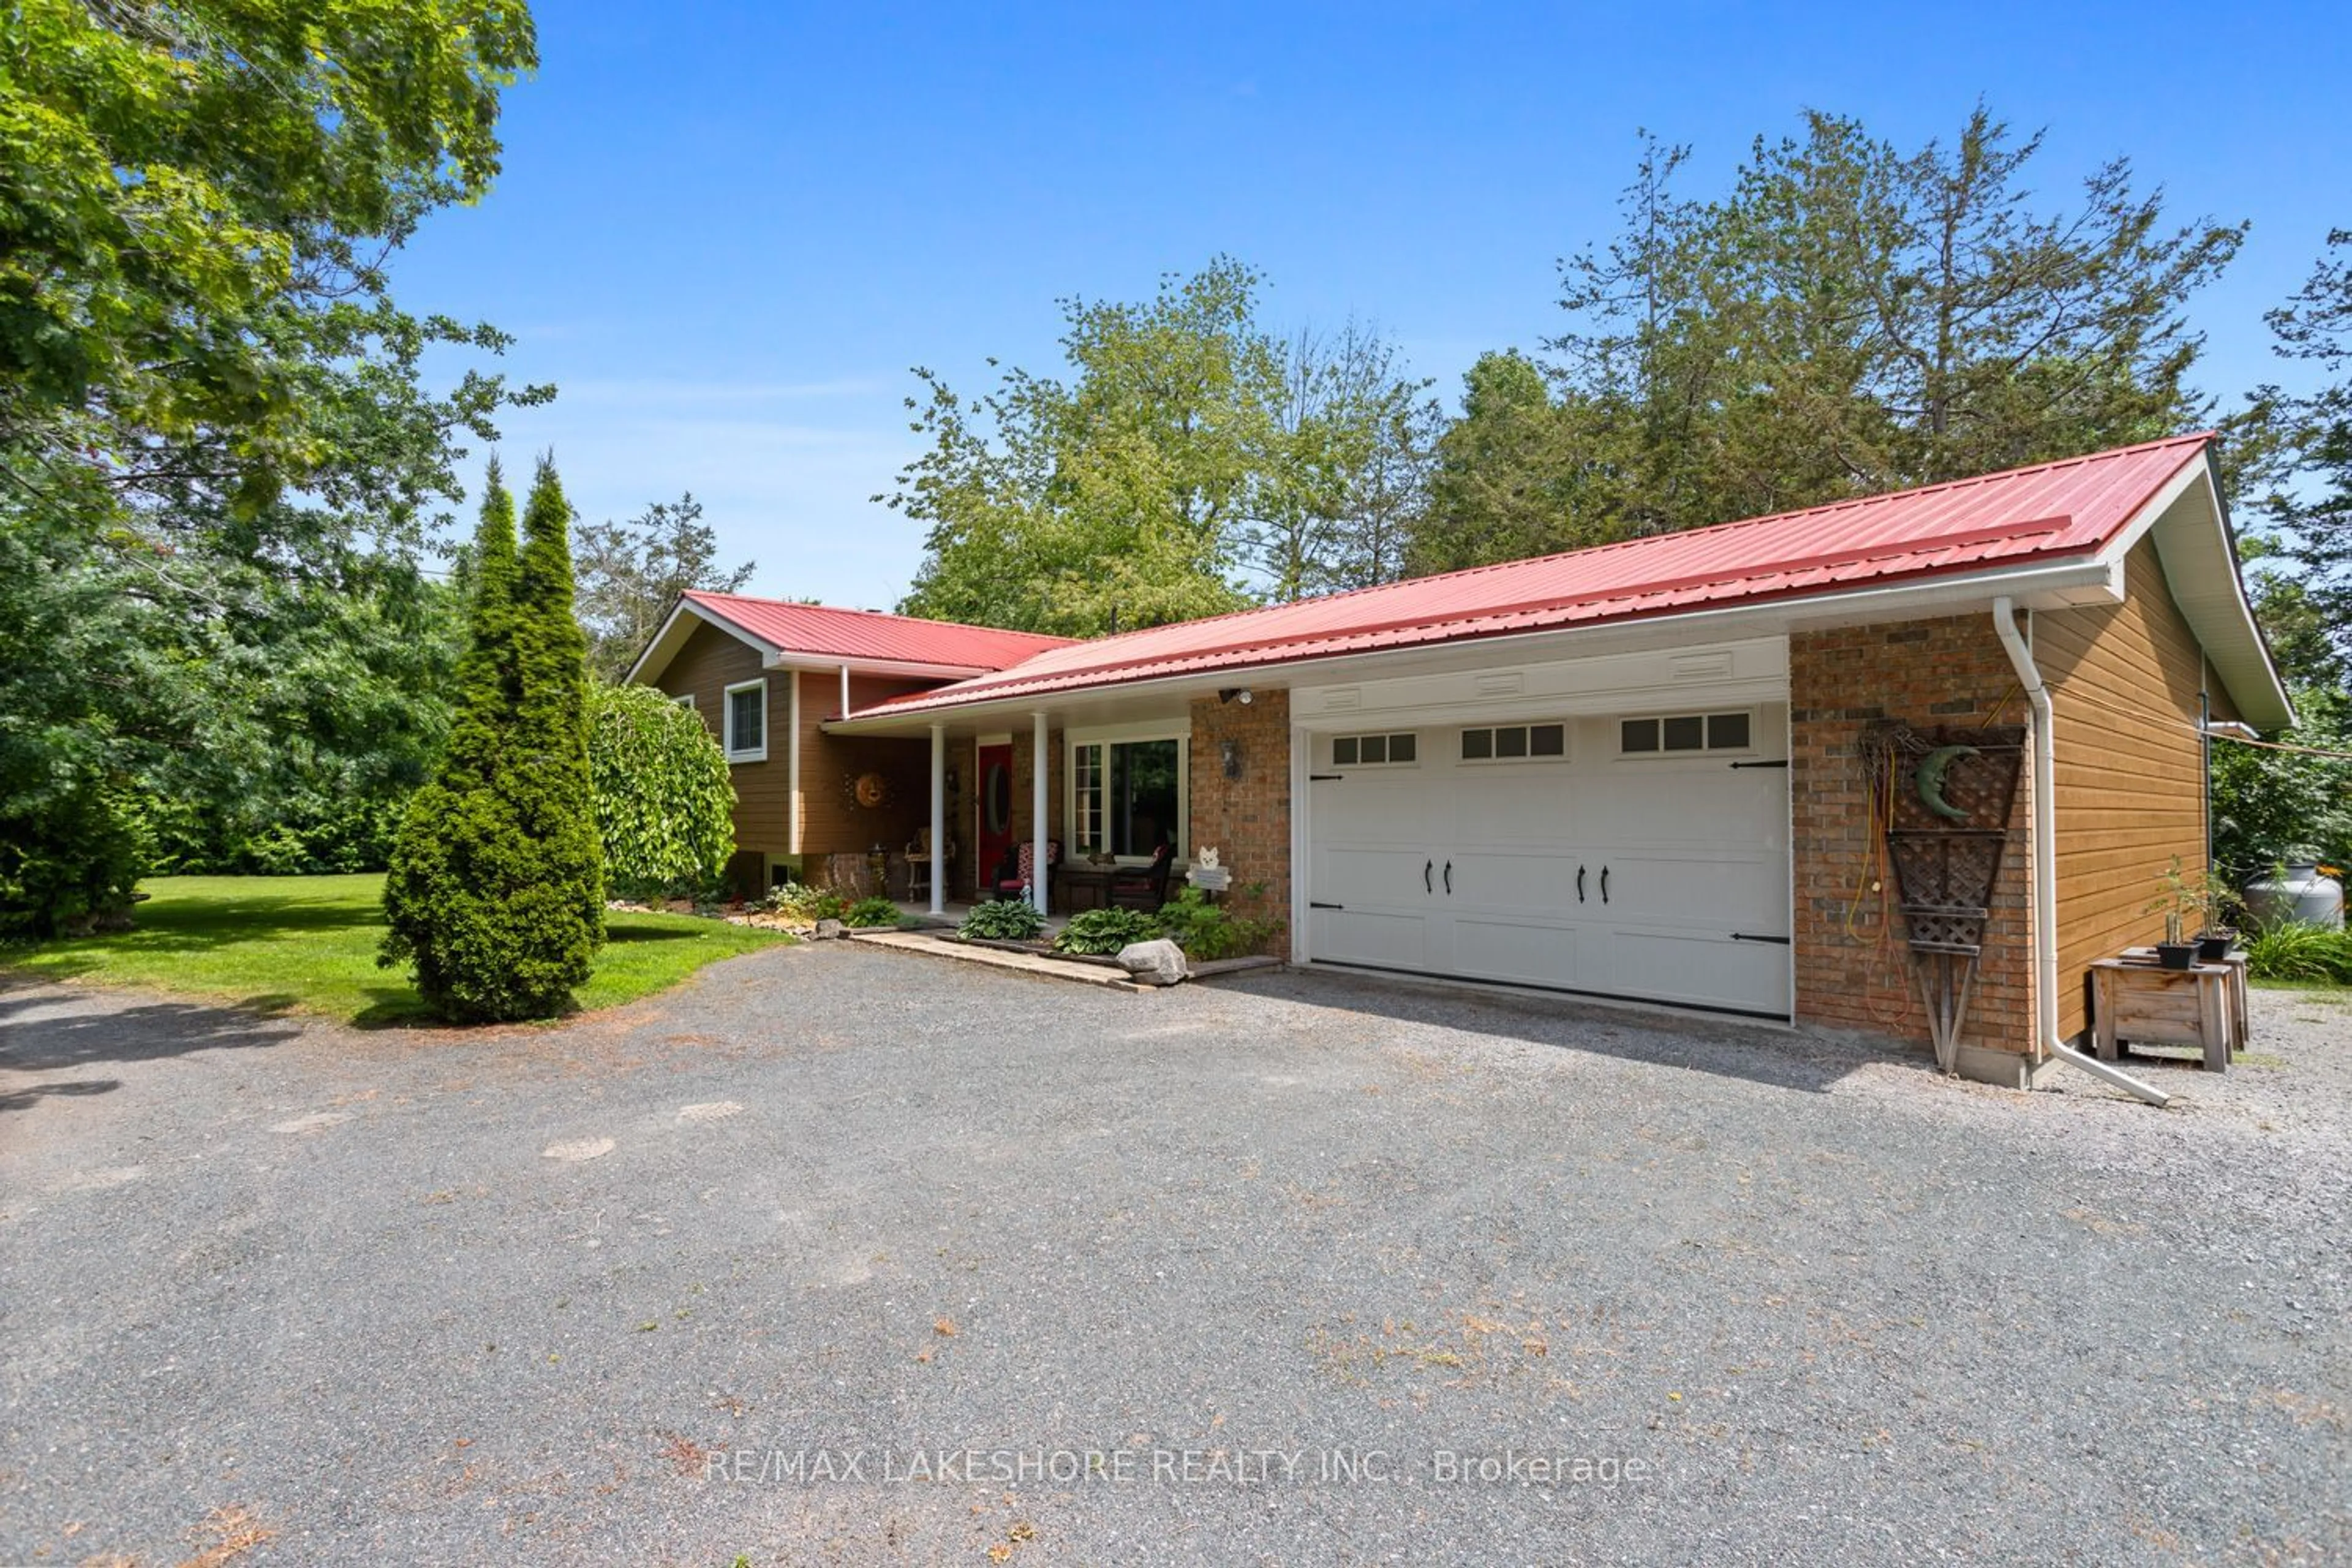 Home with brick exterior material for 21 Johnson Rd, Trent Hills Ontario K0K 1L0